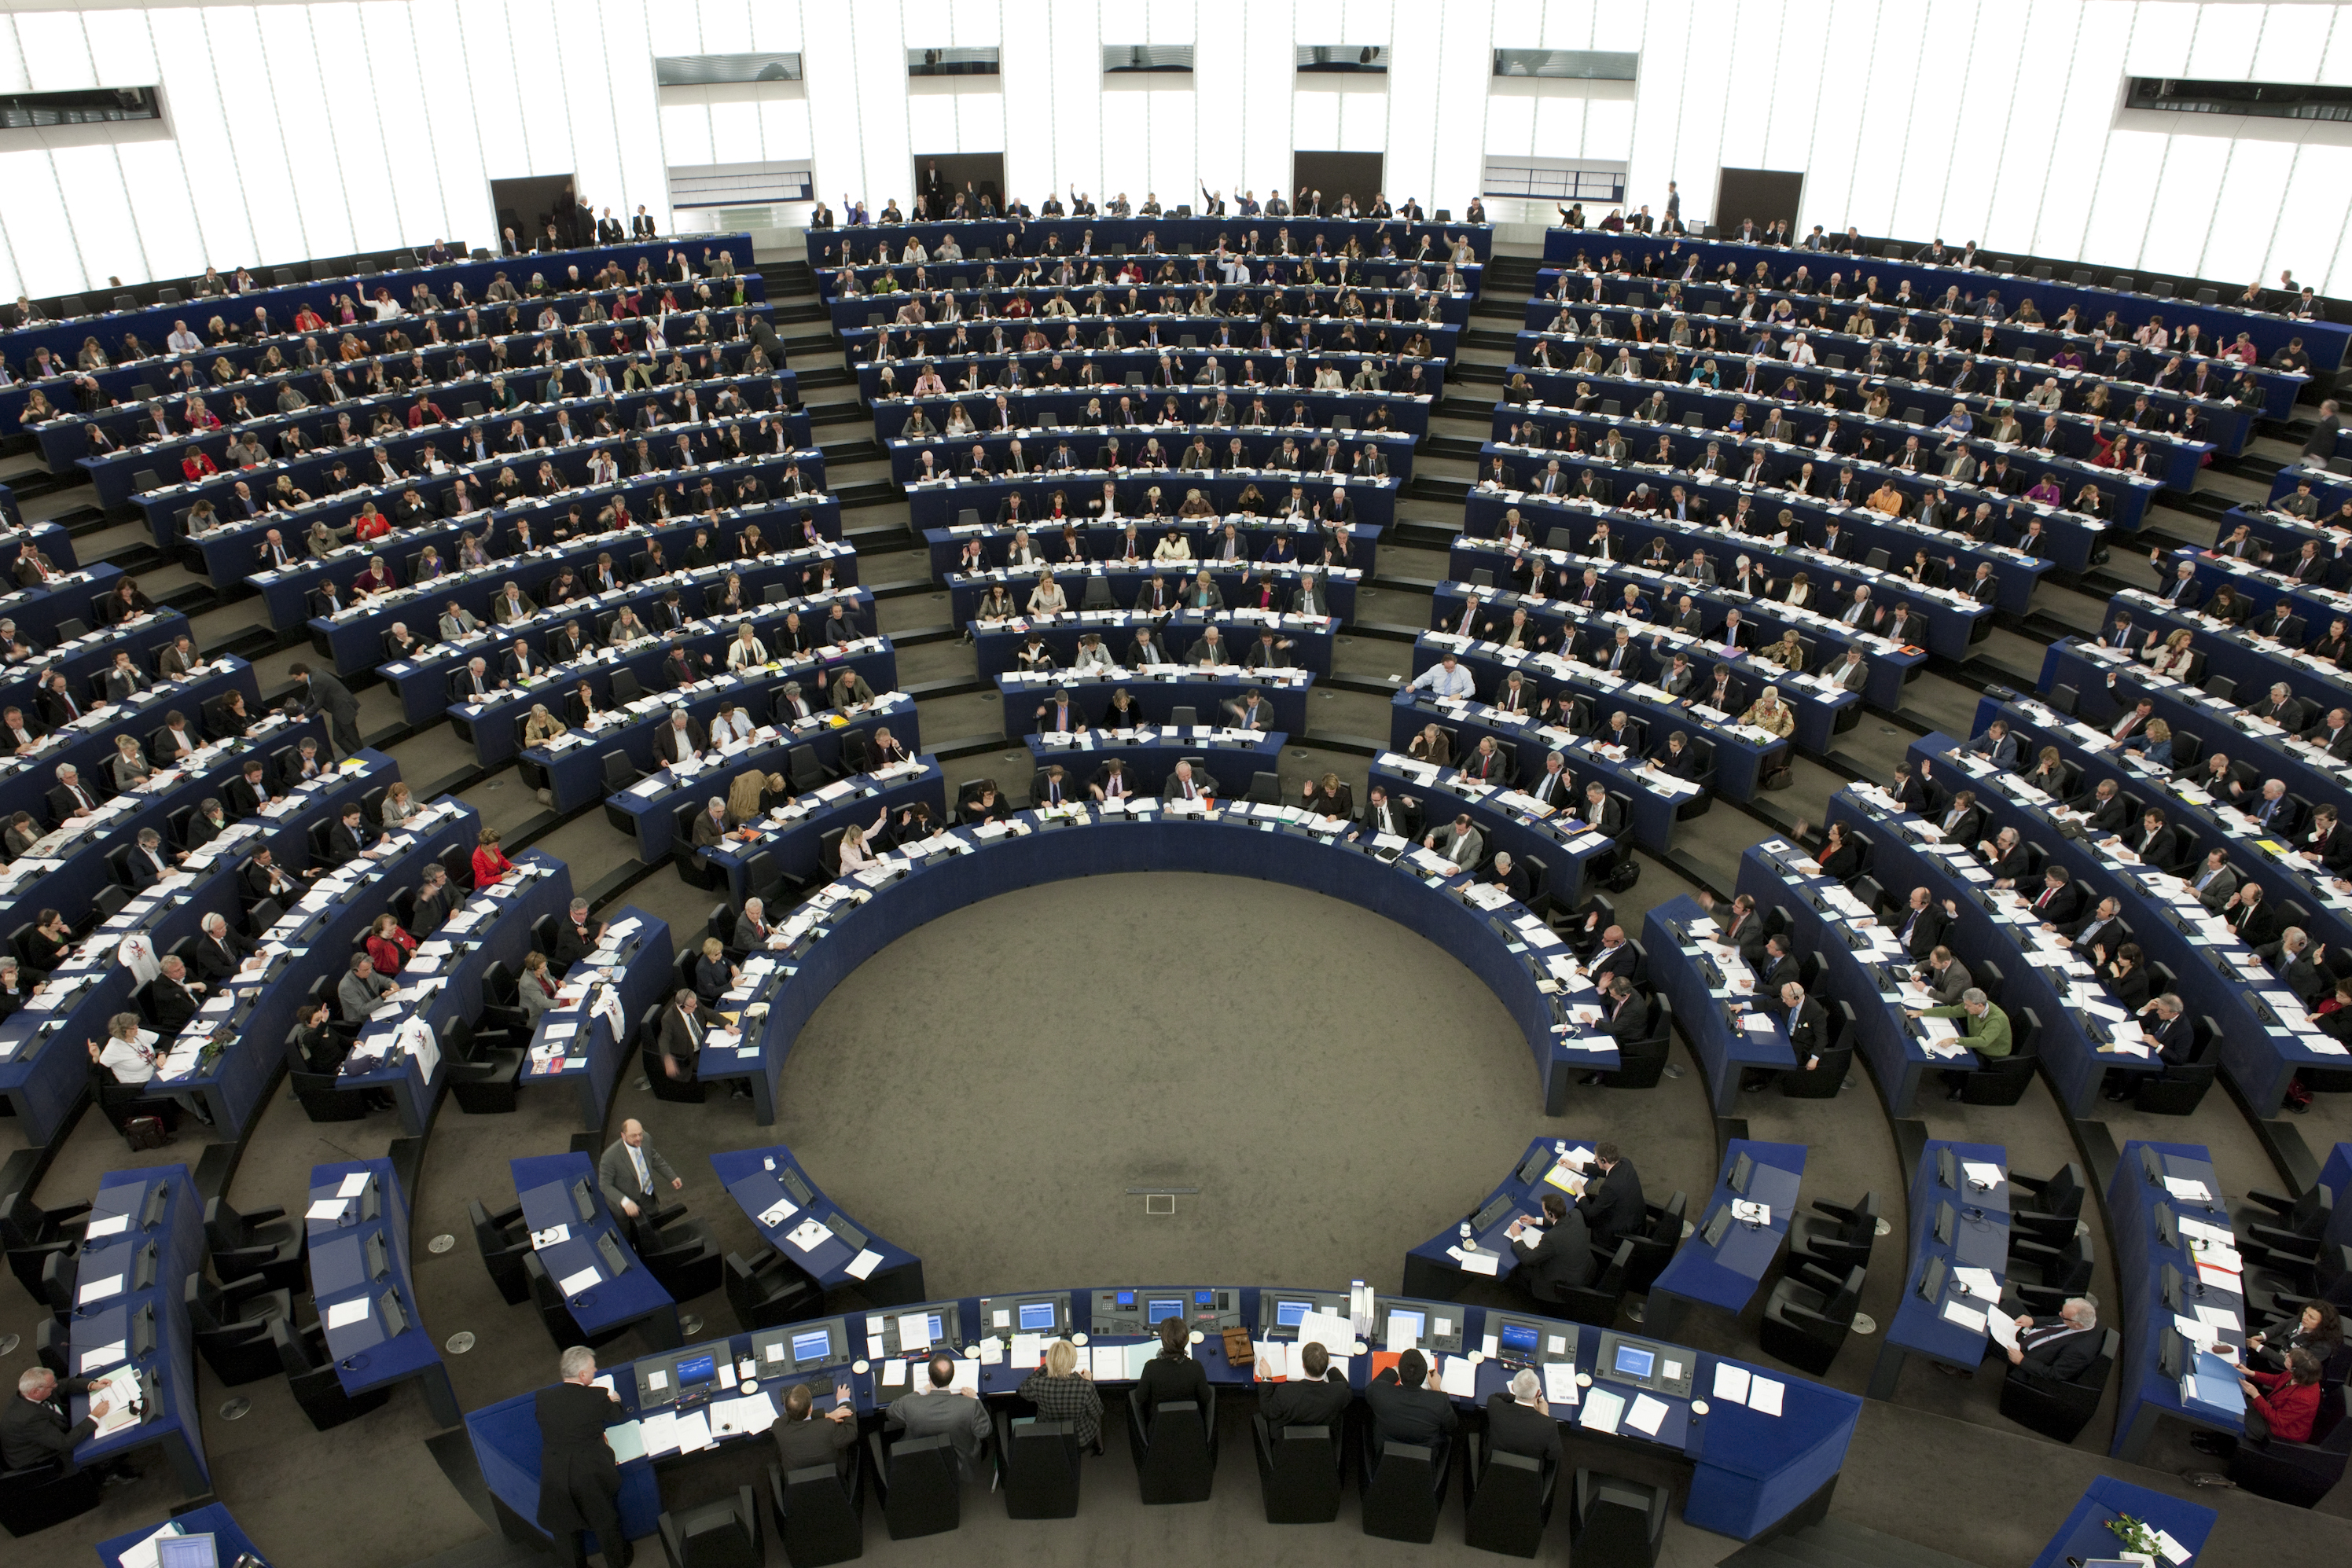 Plenary Session in Strasbourg Hemicycle